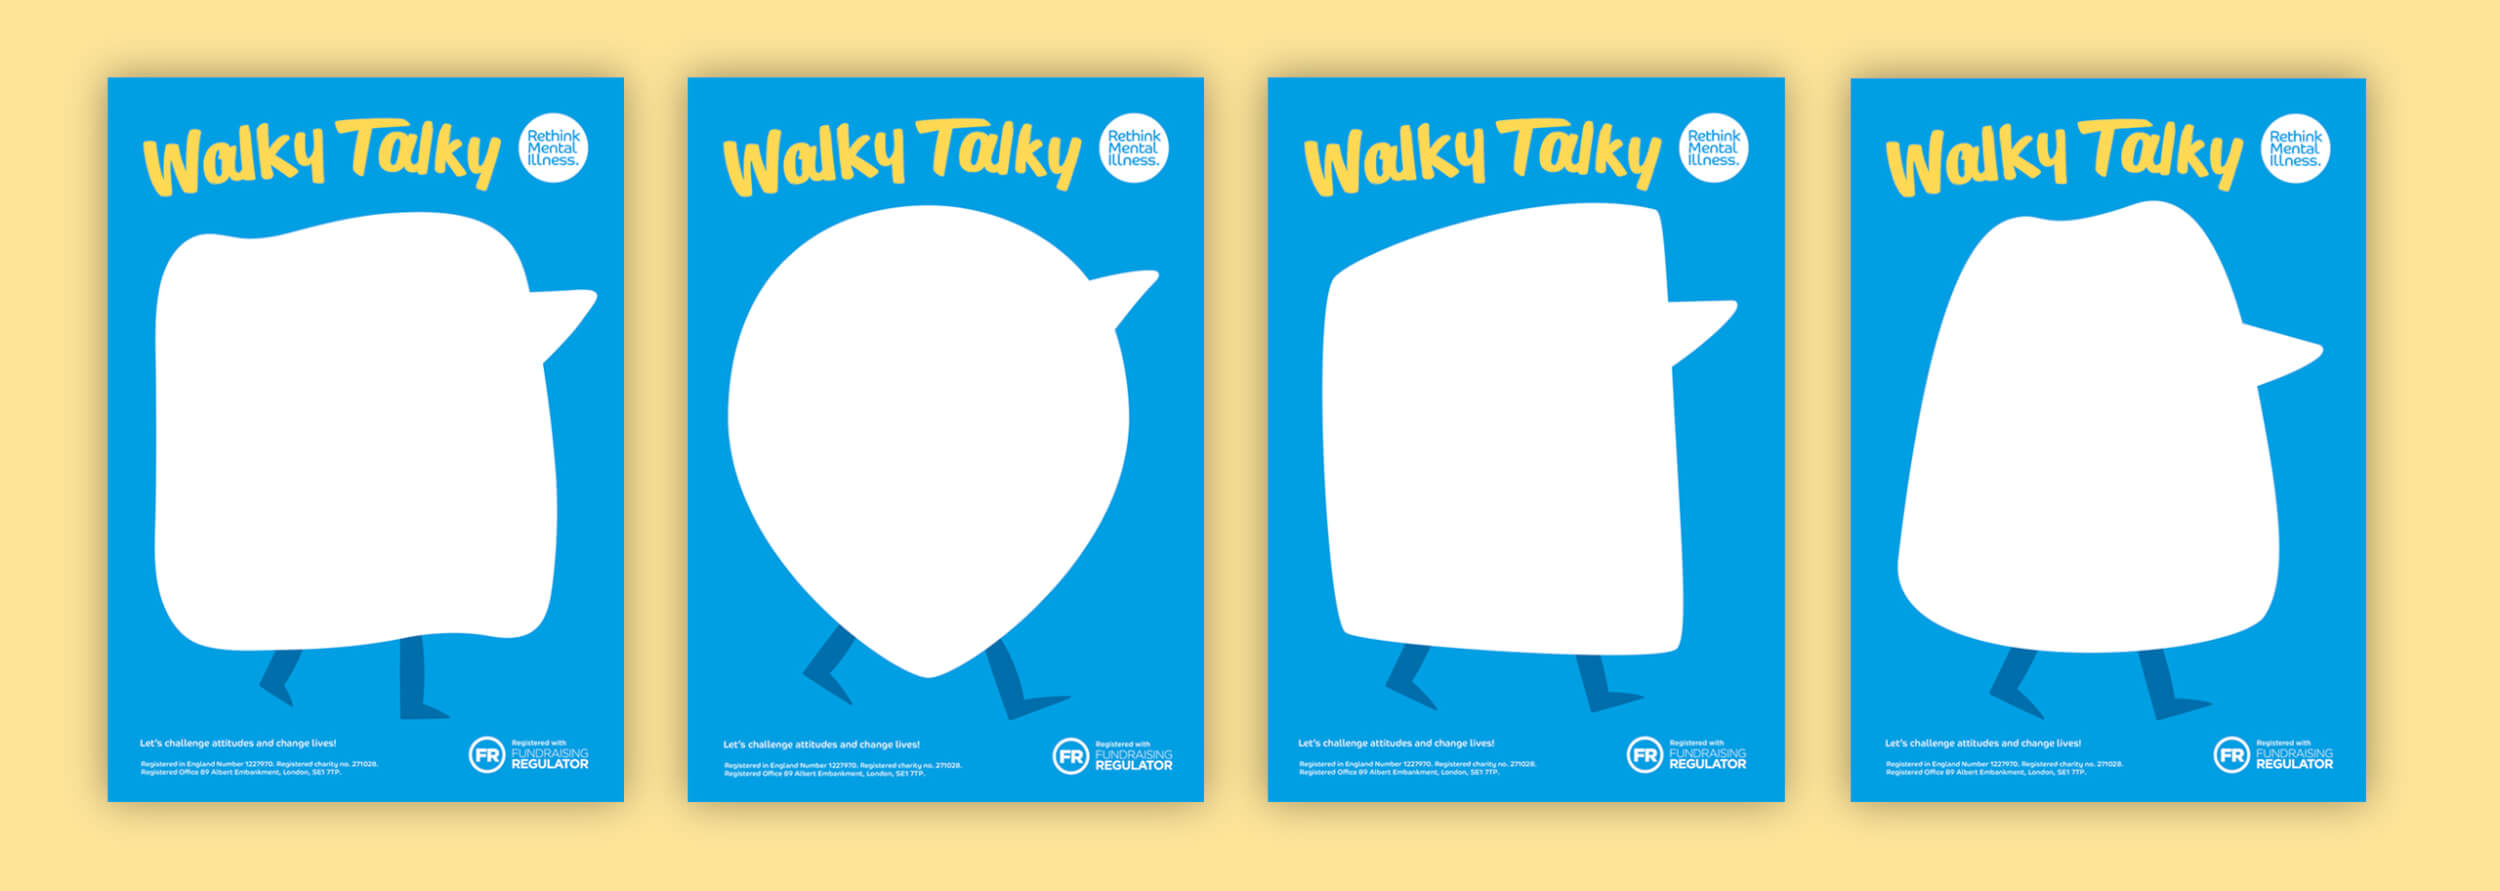 Walky Talky Charity Event Empty Belly Posters